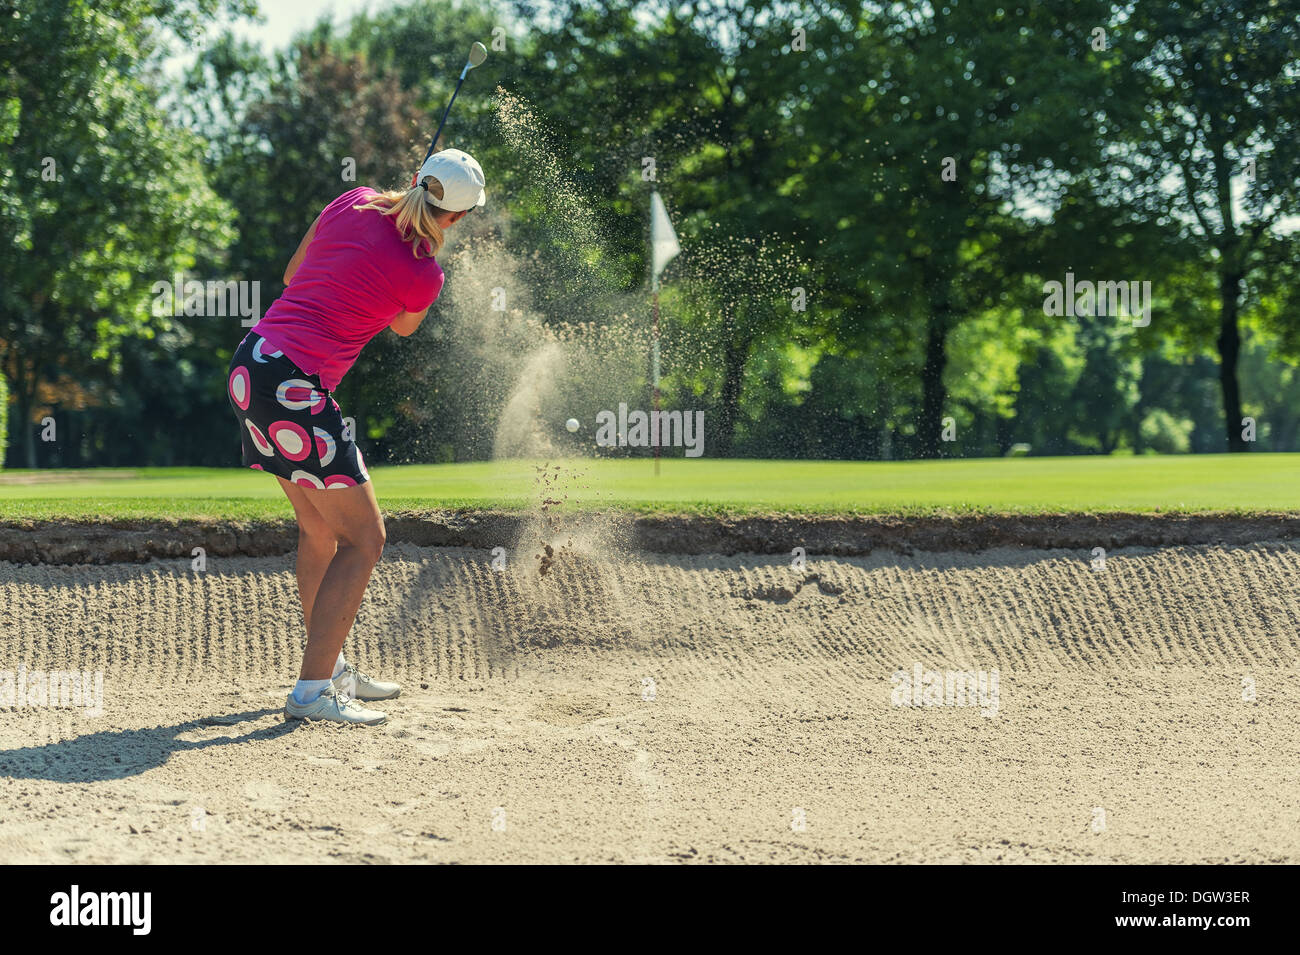 Golfer hitting the ball from the bunker Stock Photo